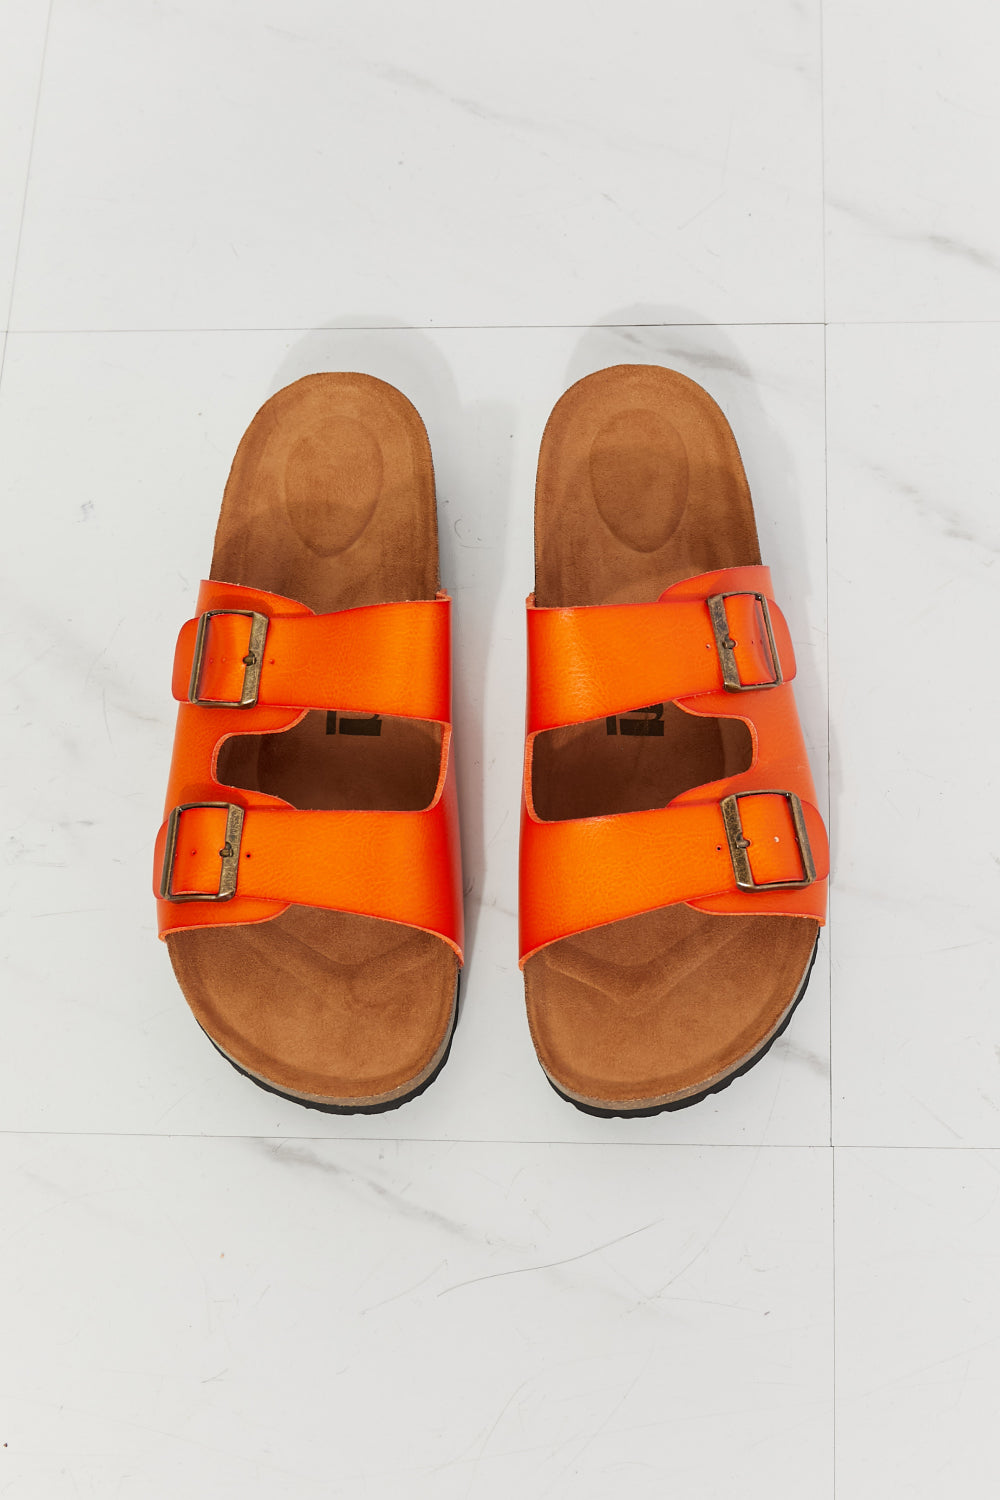 Feeling Alive Sandals-SHIPS DIRECTLY TO YOU!